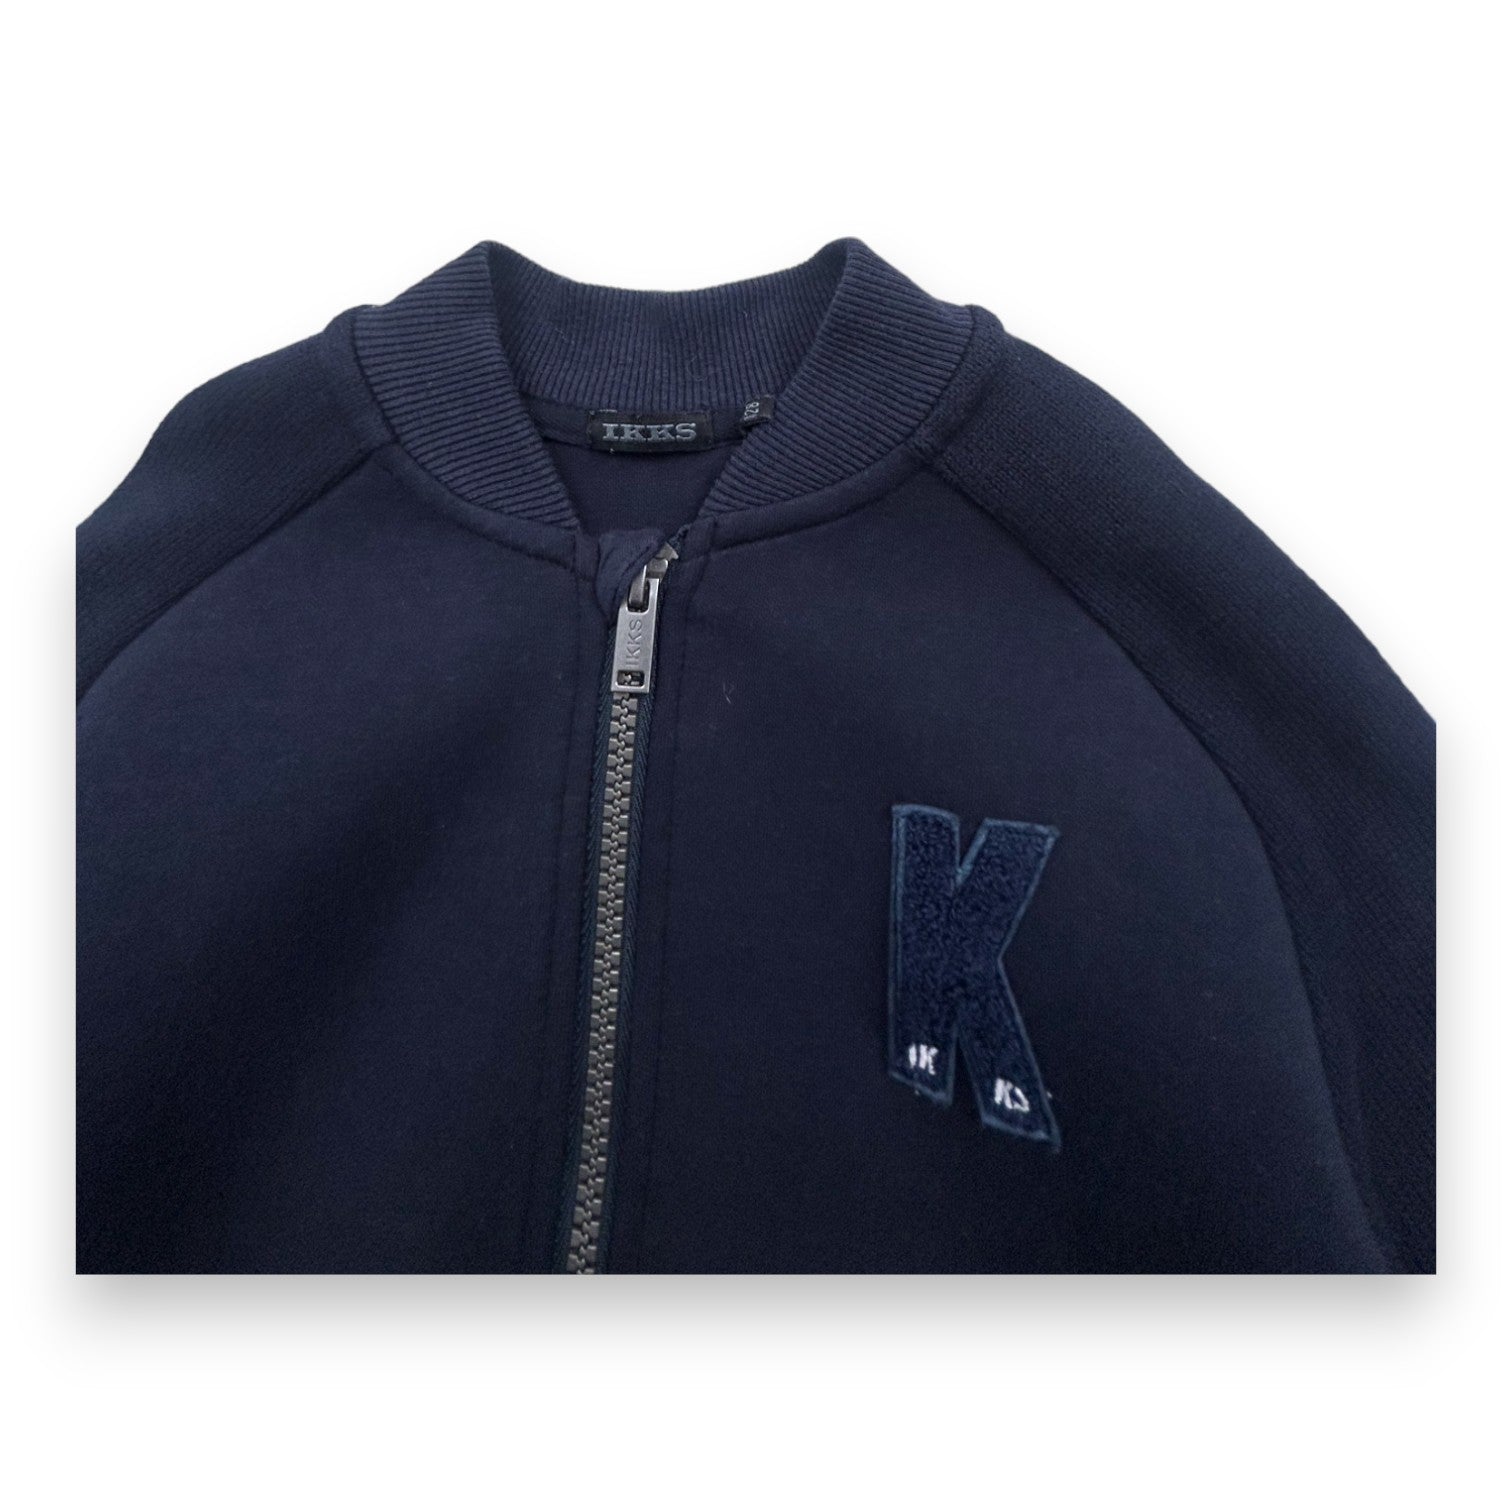 IKKS - Teddy bleu marine manches longues broderie dos - 8 ans